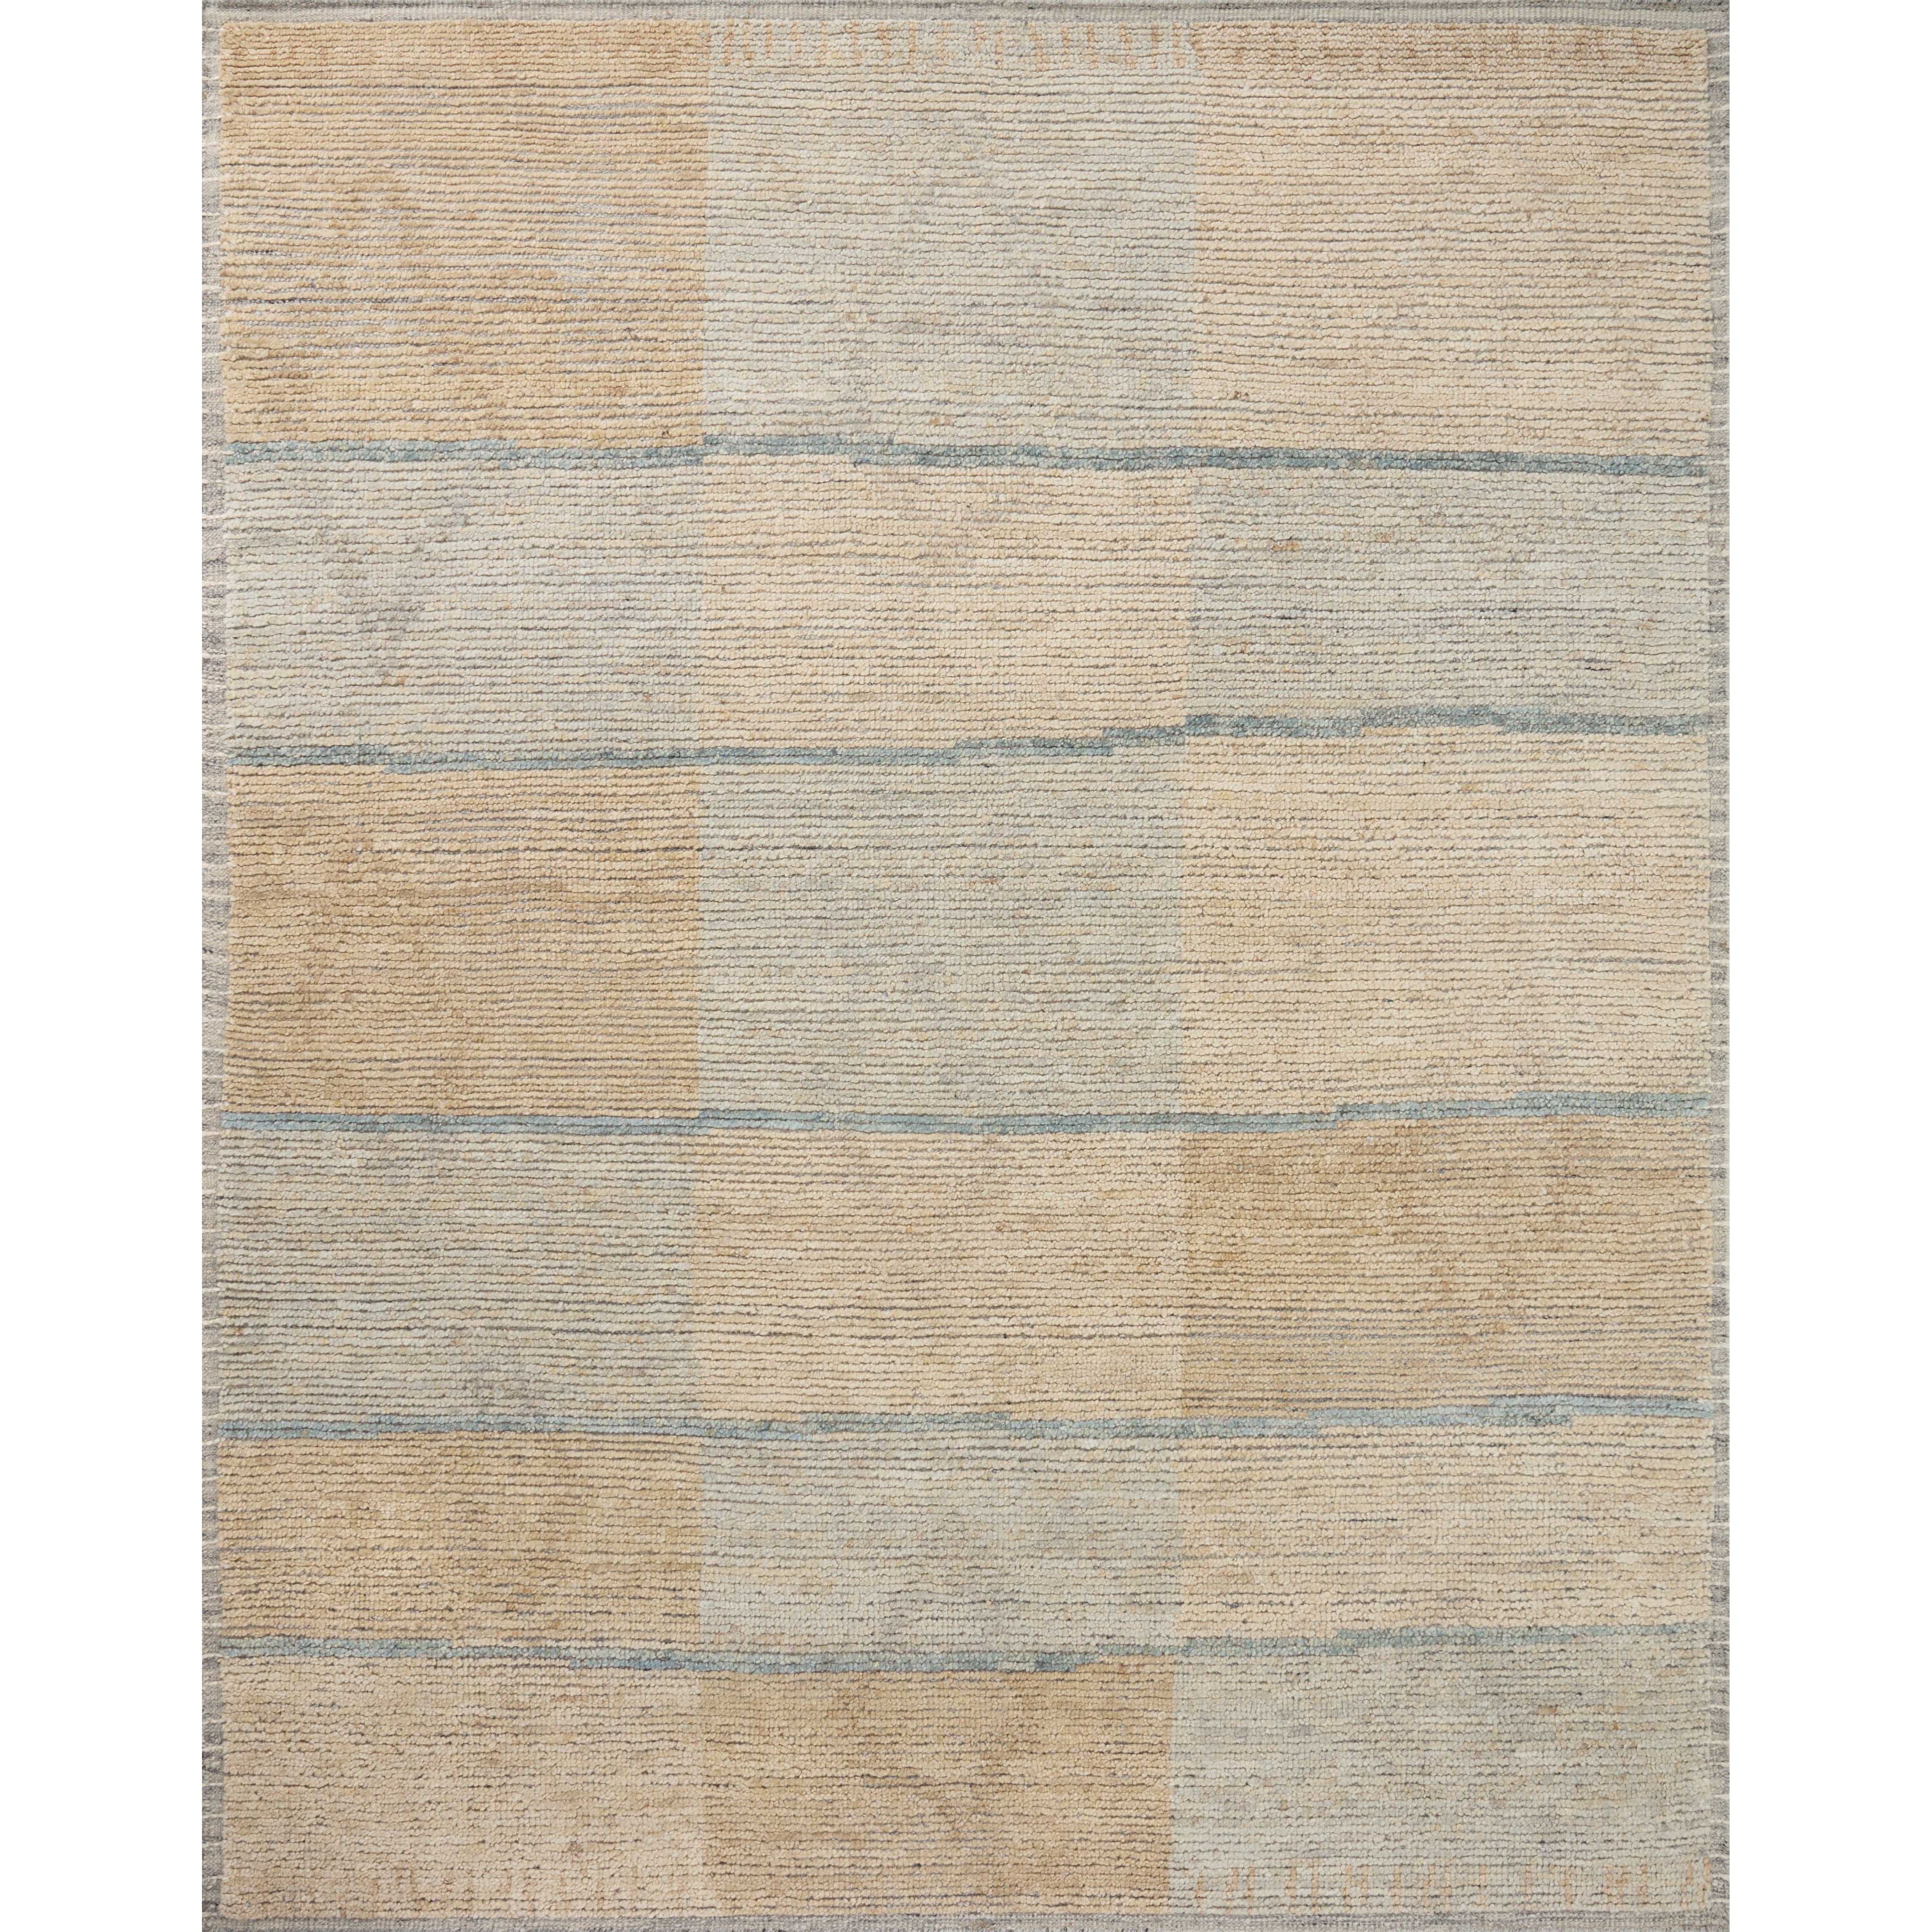 Amber Lewis x Loloi Briyana Sky / Wheat Rug combines the incredible ribbed texture of Moroccan rugs with clean, contemporary design, thanks to Lewis’s careful eye for details. Amethyst Home provides interior design services, furniture, rugs, and lighting in the Monterey metro area.